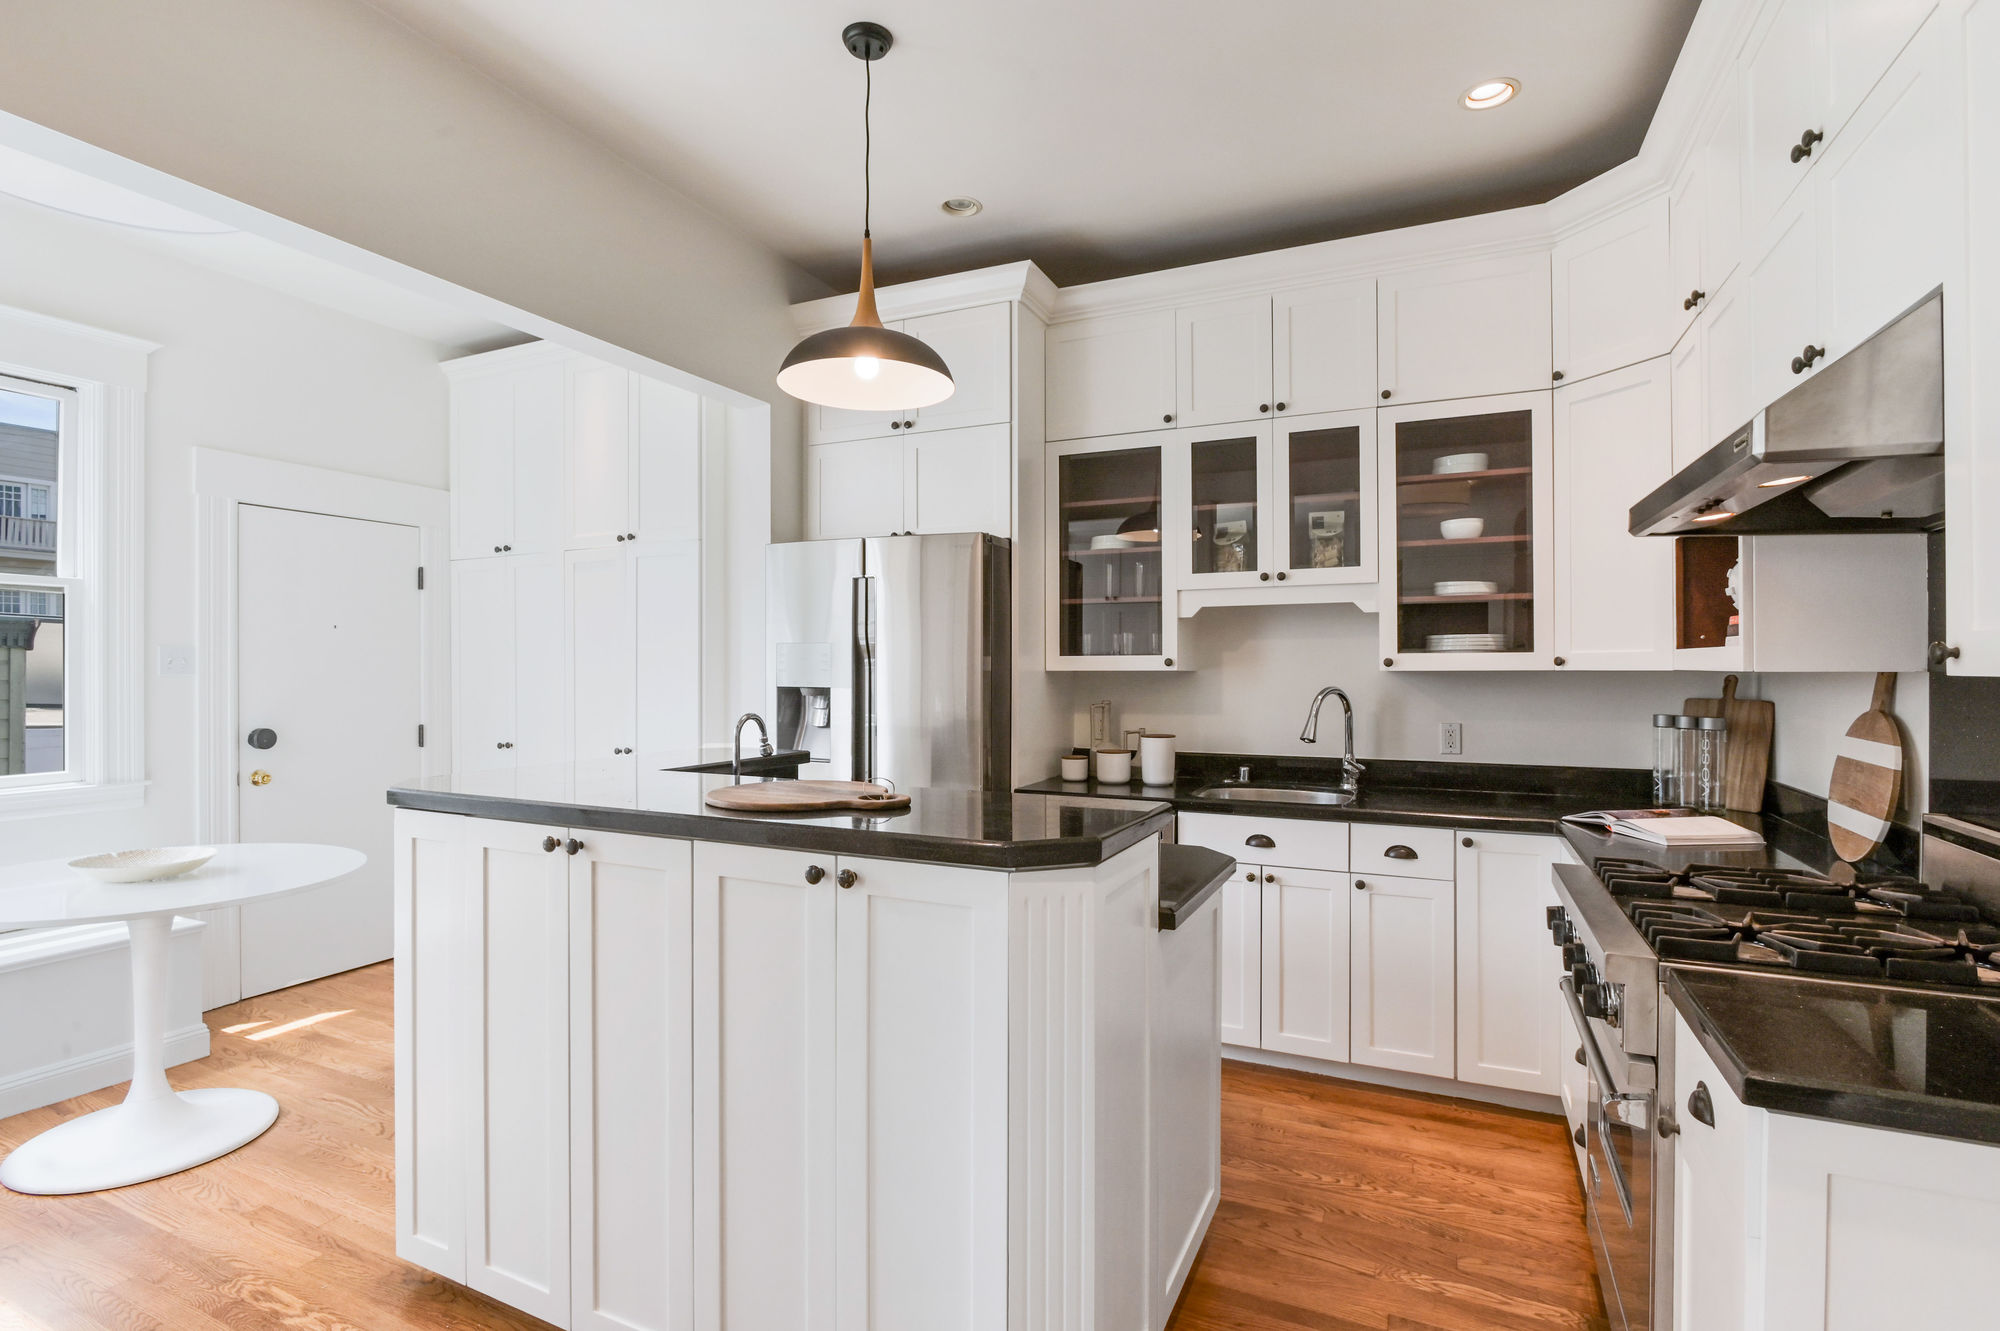 Property Photo: View of the kitchen, featuring white cabinets and wood floors